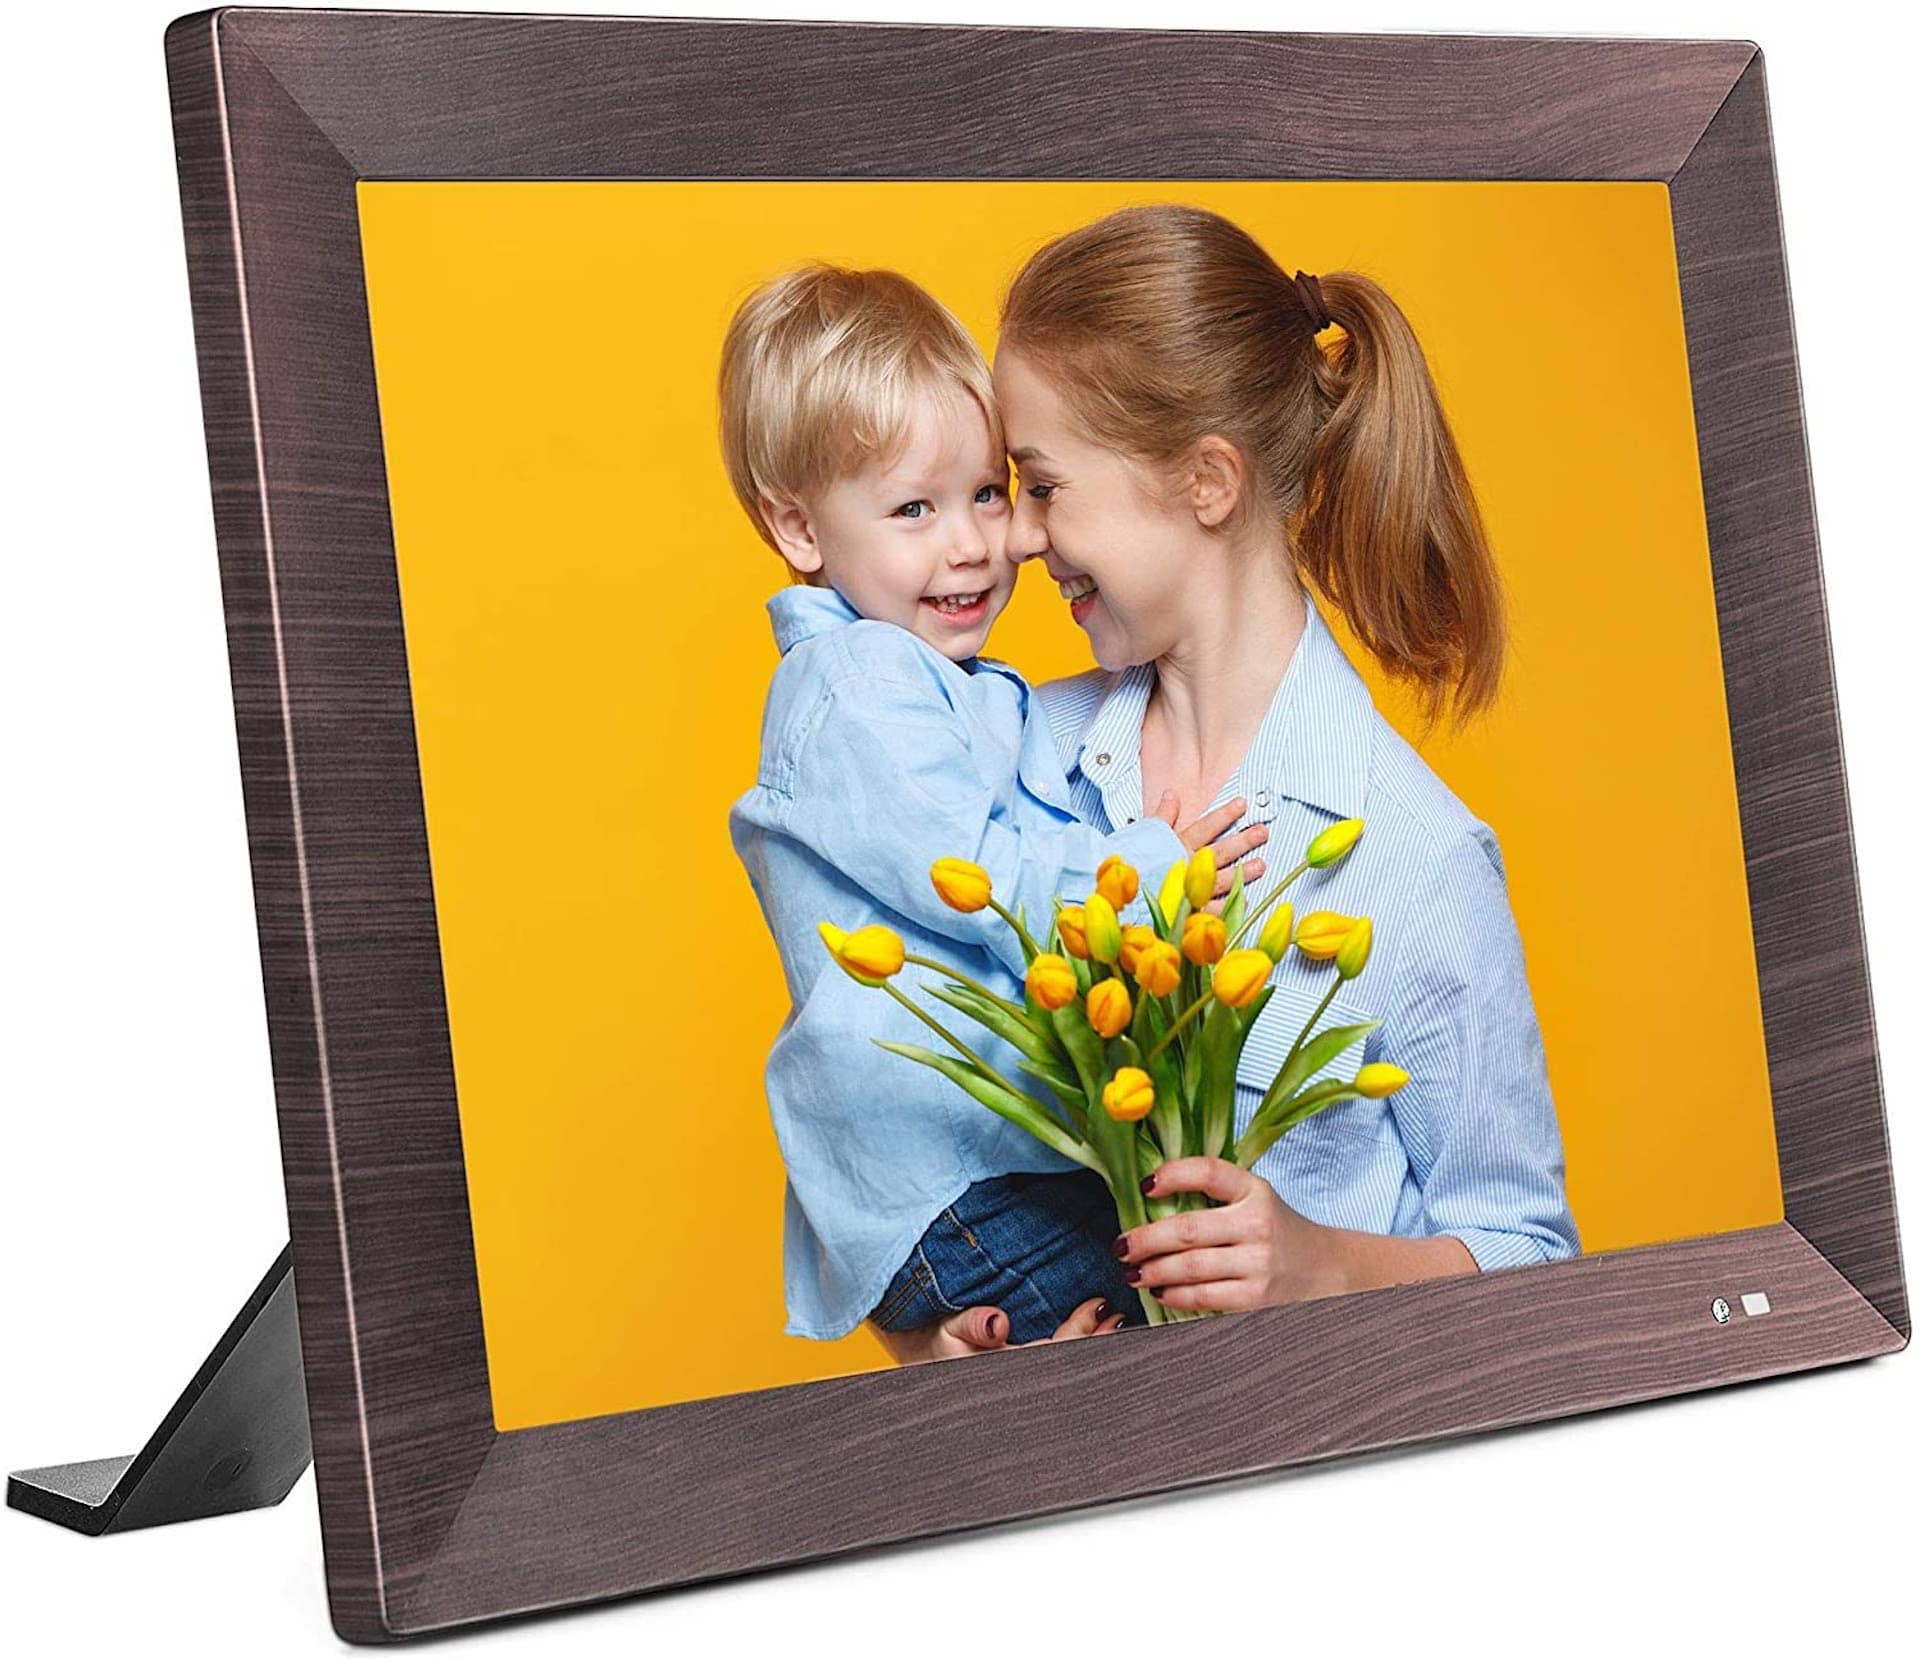 Best Photo Gifts for Photographers - Ideas Photographer Lovers - Photo Album Frame